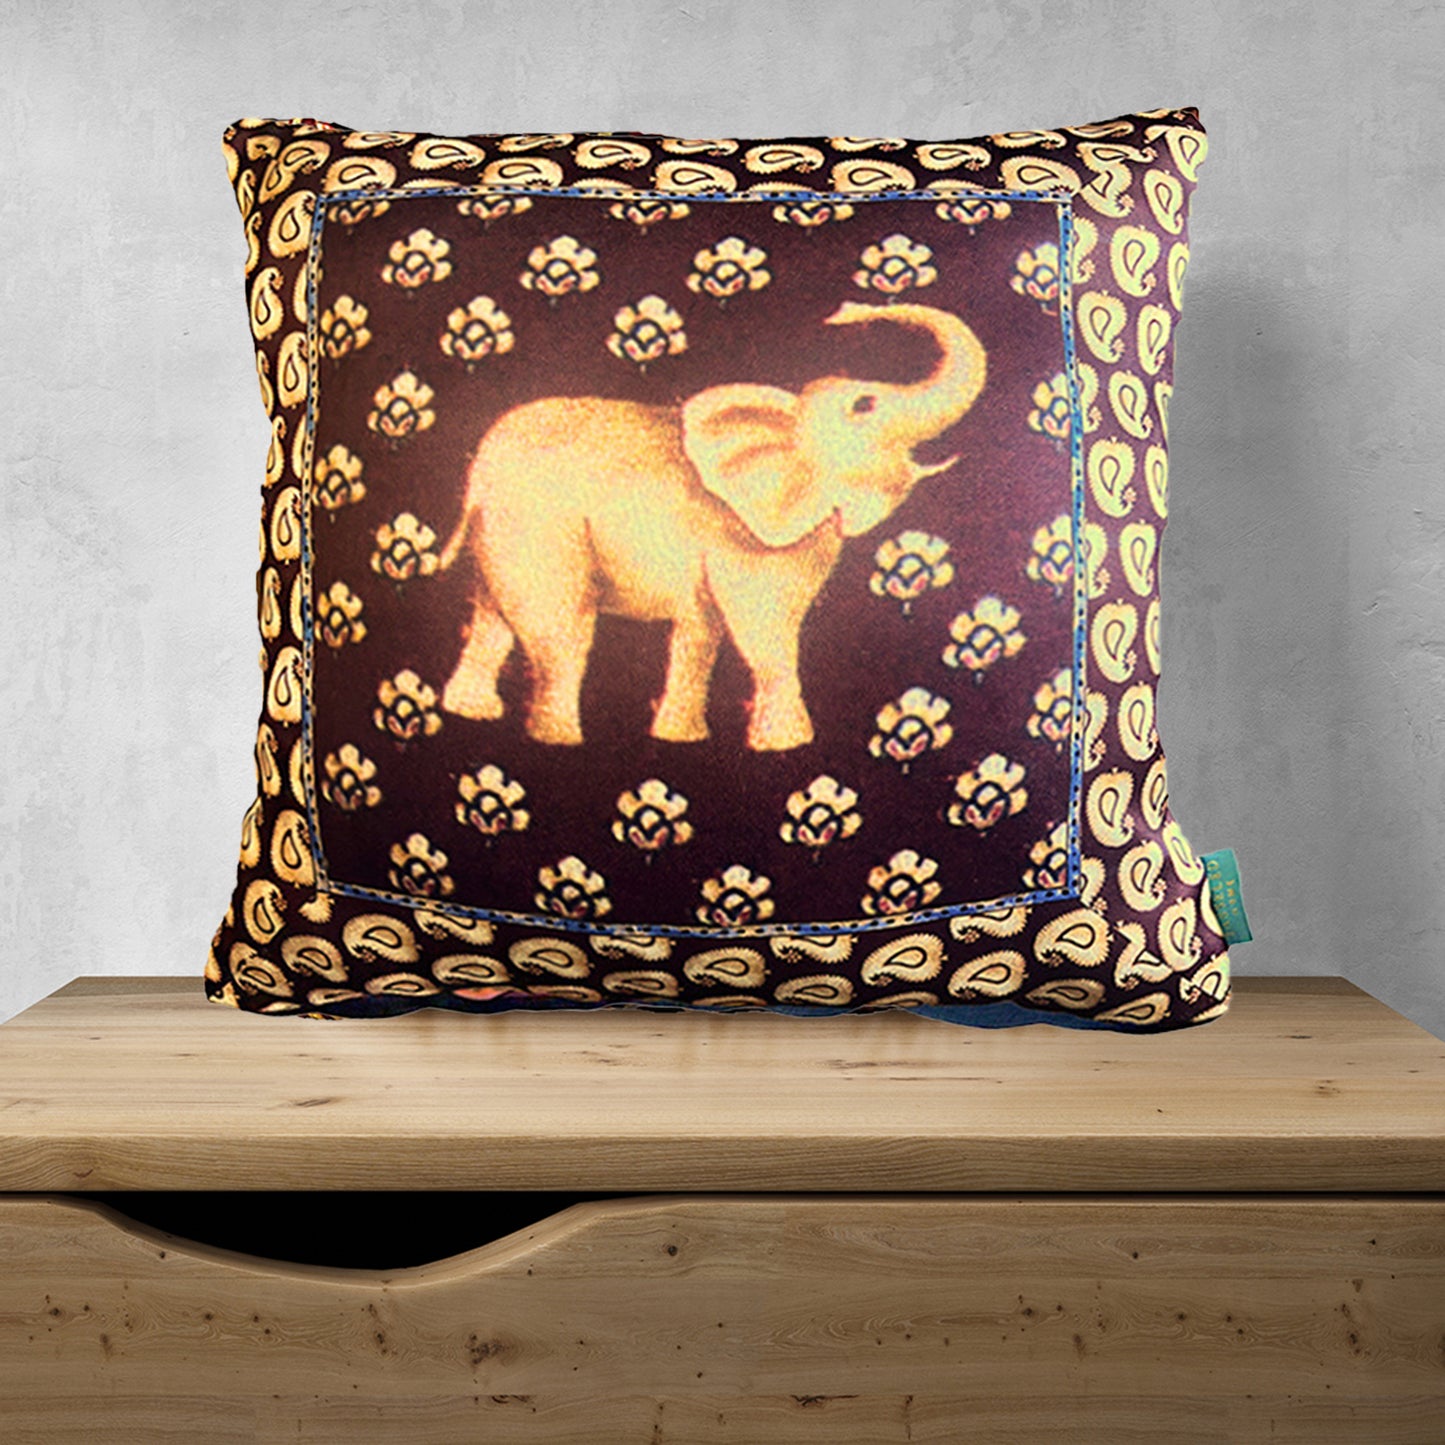 Tusker Satin Cushion Cover | 16 x 16 inches